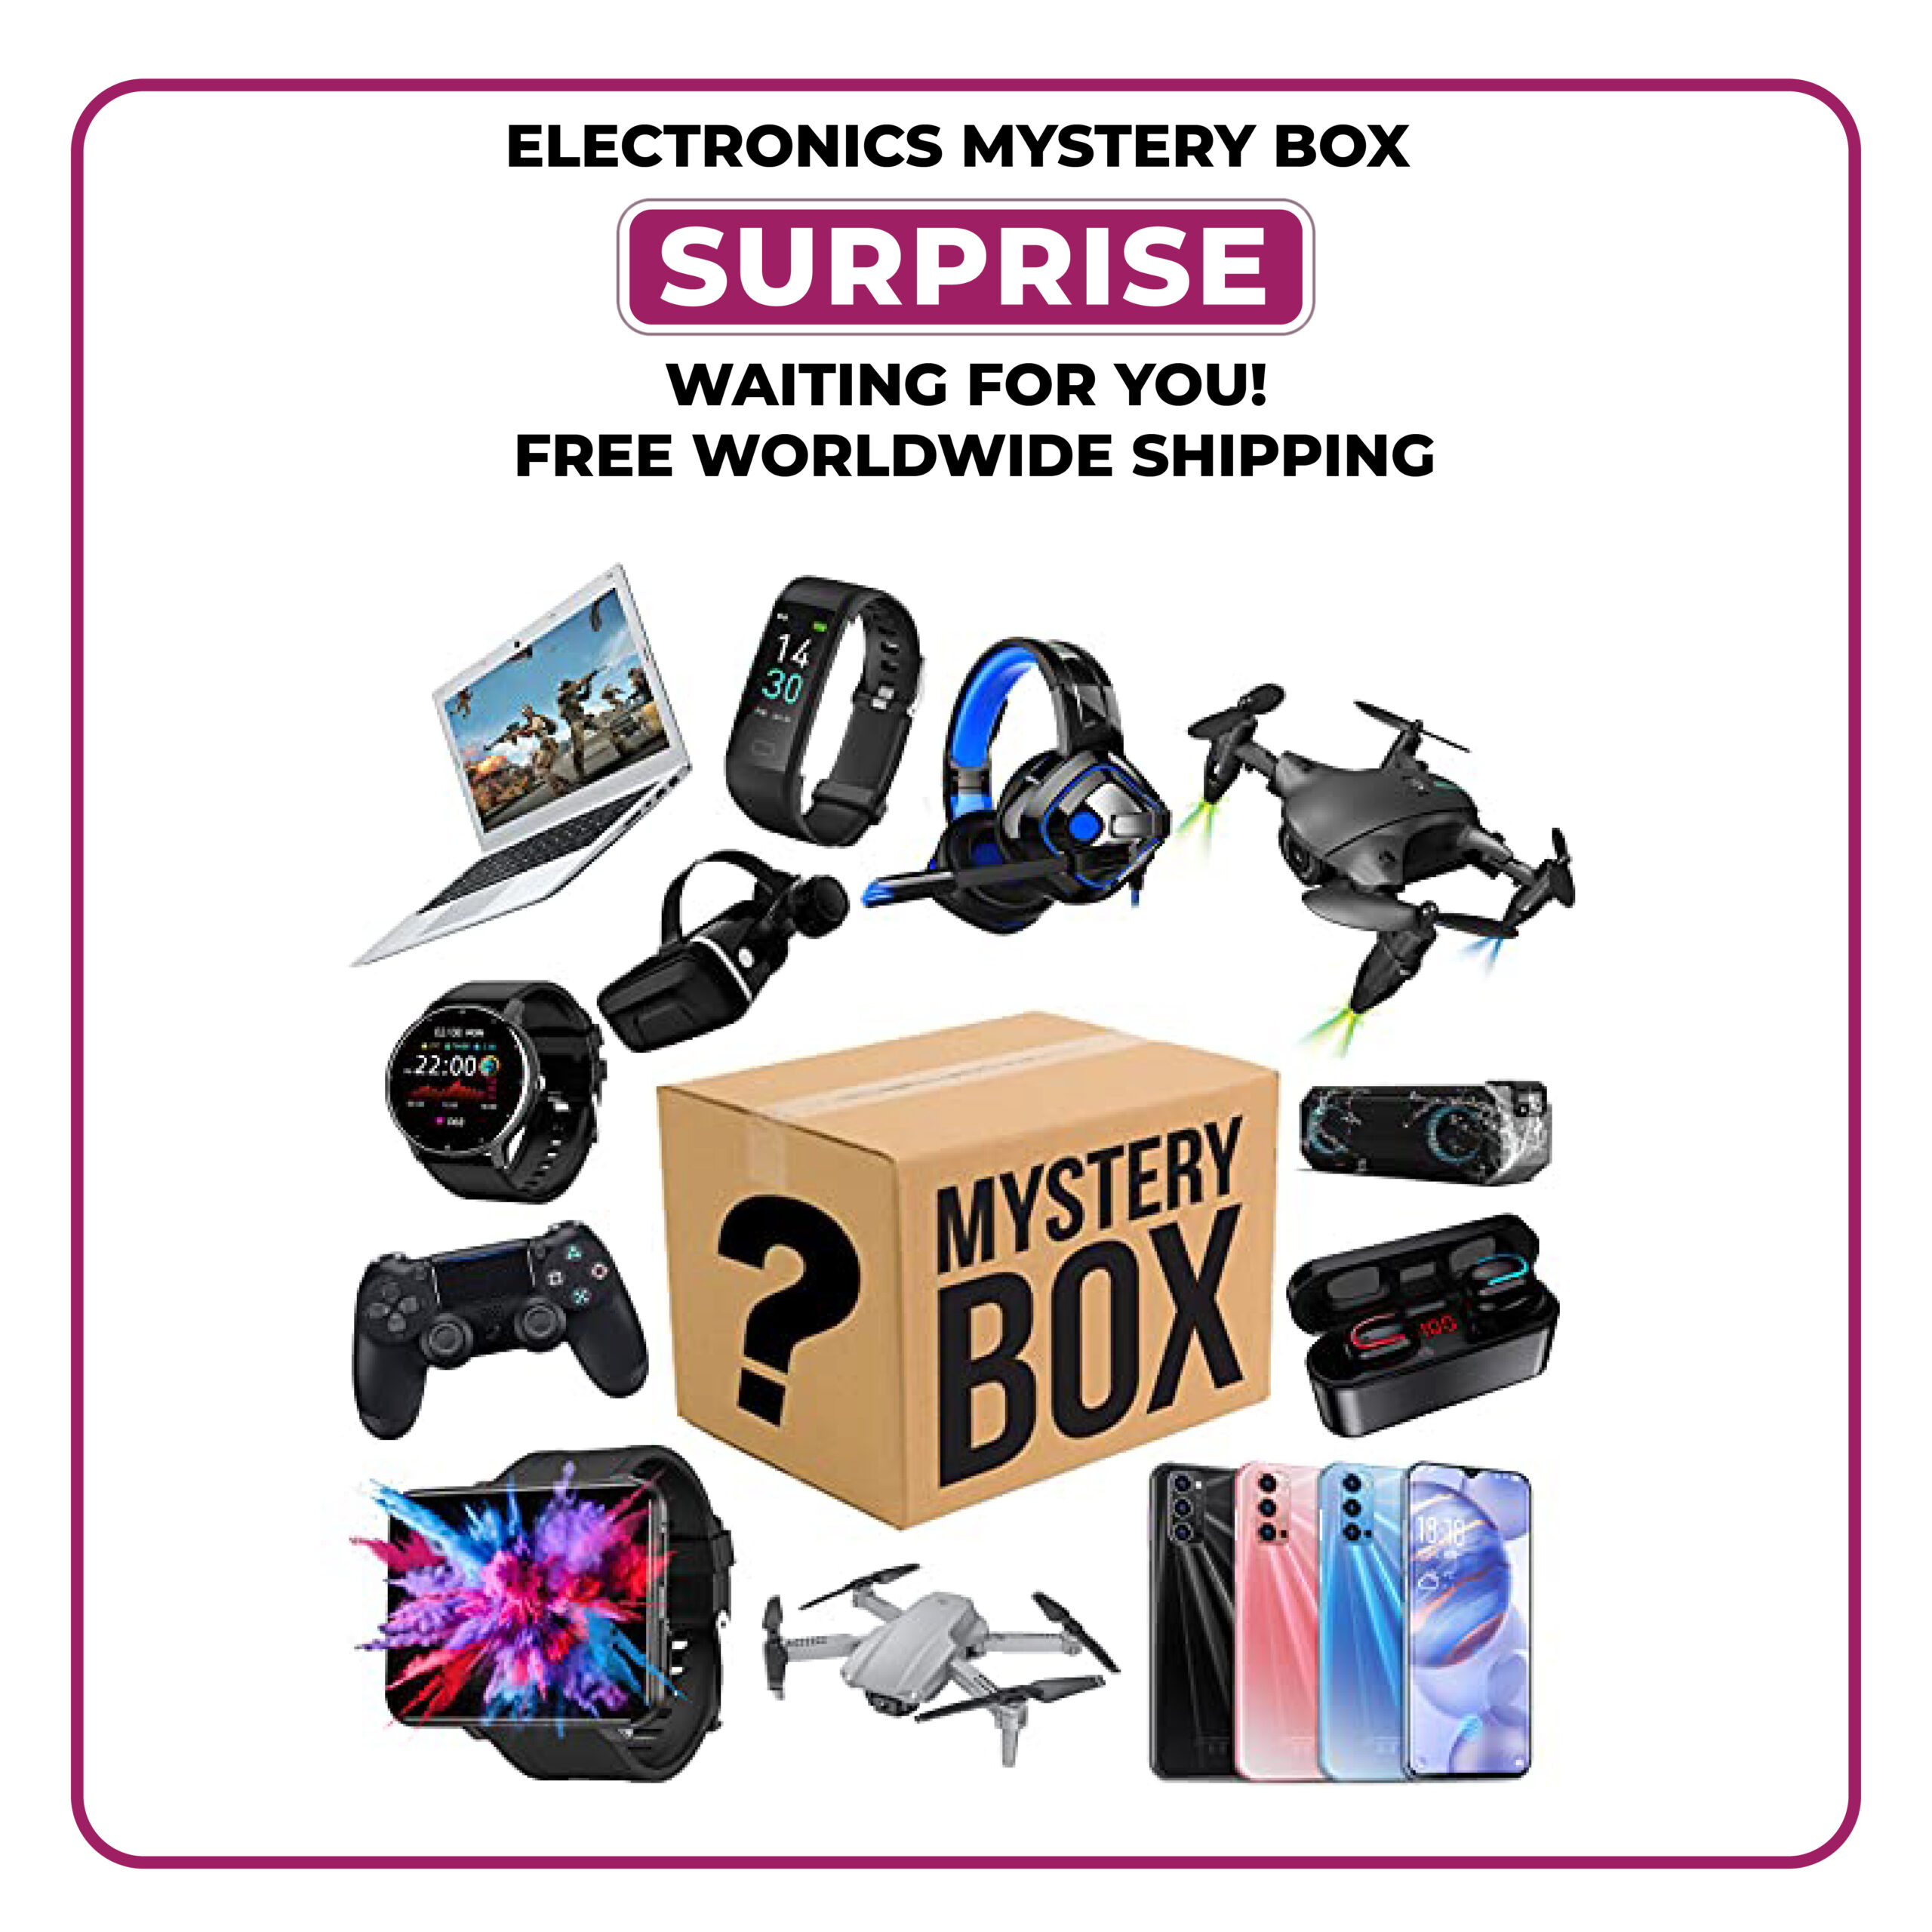 Mystery Box Electronics, Surprise Explosion Box, Super Cost-effective,   Mystery Box, Give Yourself a Surprise or Give It As a Gift To Others B  price in UAE,  UAE